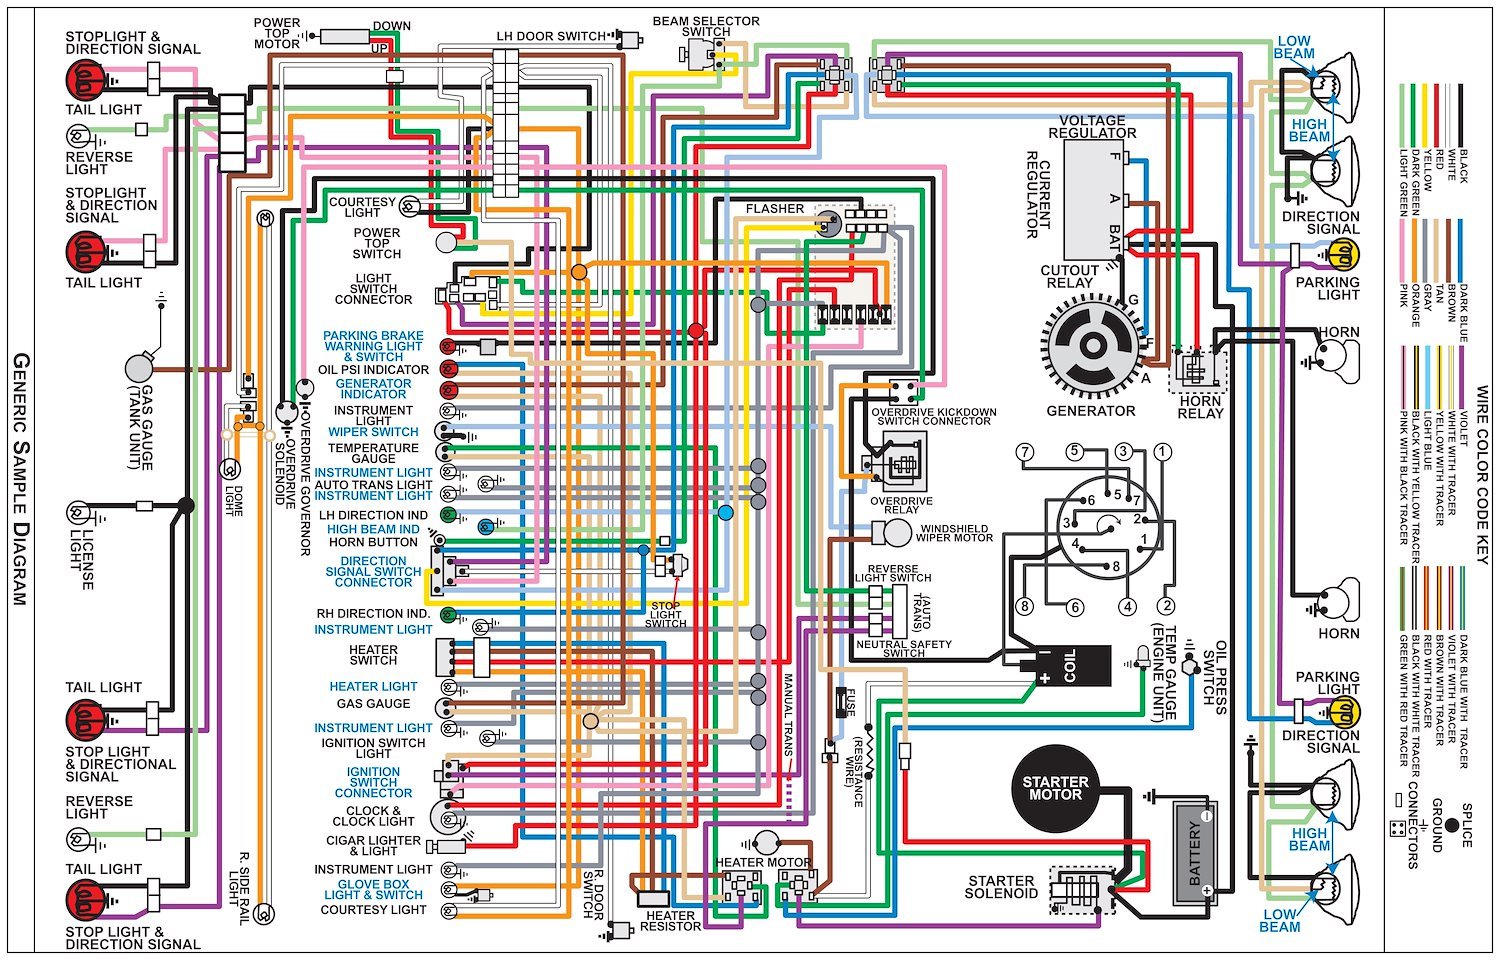 Wiring Diagram for 1966 Dodge Charger (Non HEMI Engine), 11 in x 17 in., Laminated